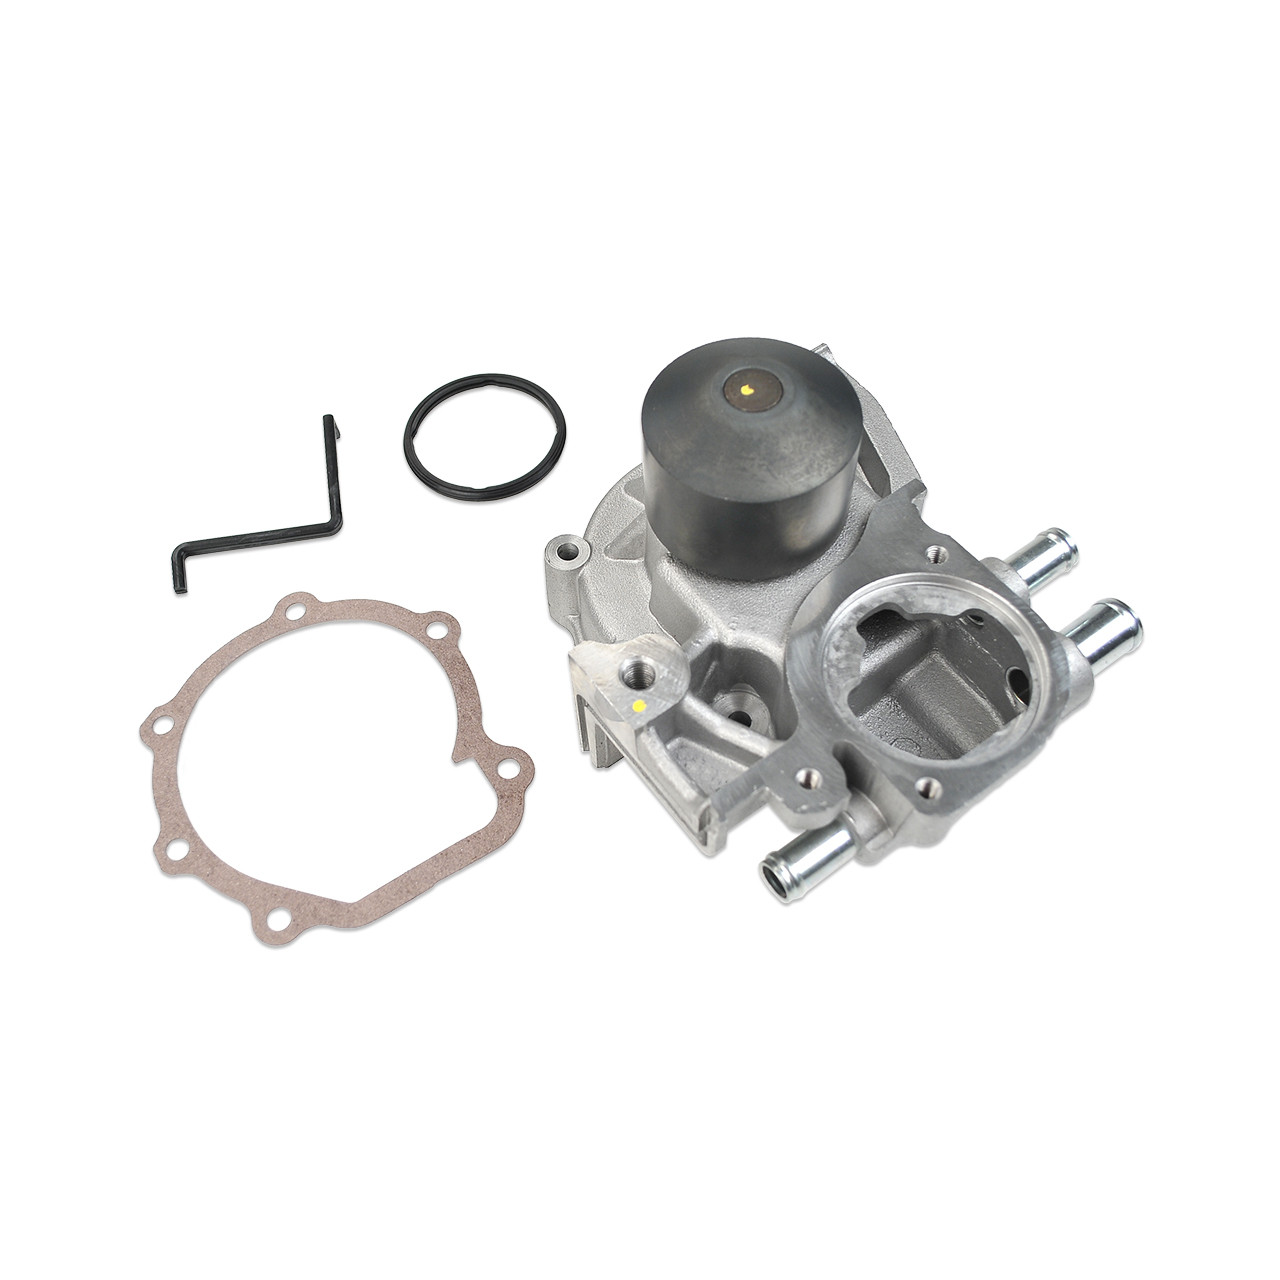 IAG Timed Long Block Component Packages For Subaru WRX, STI, LGT, FXT - Water Pump